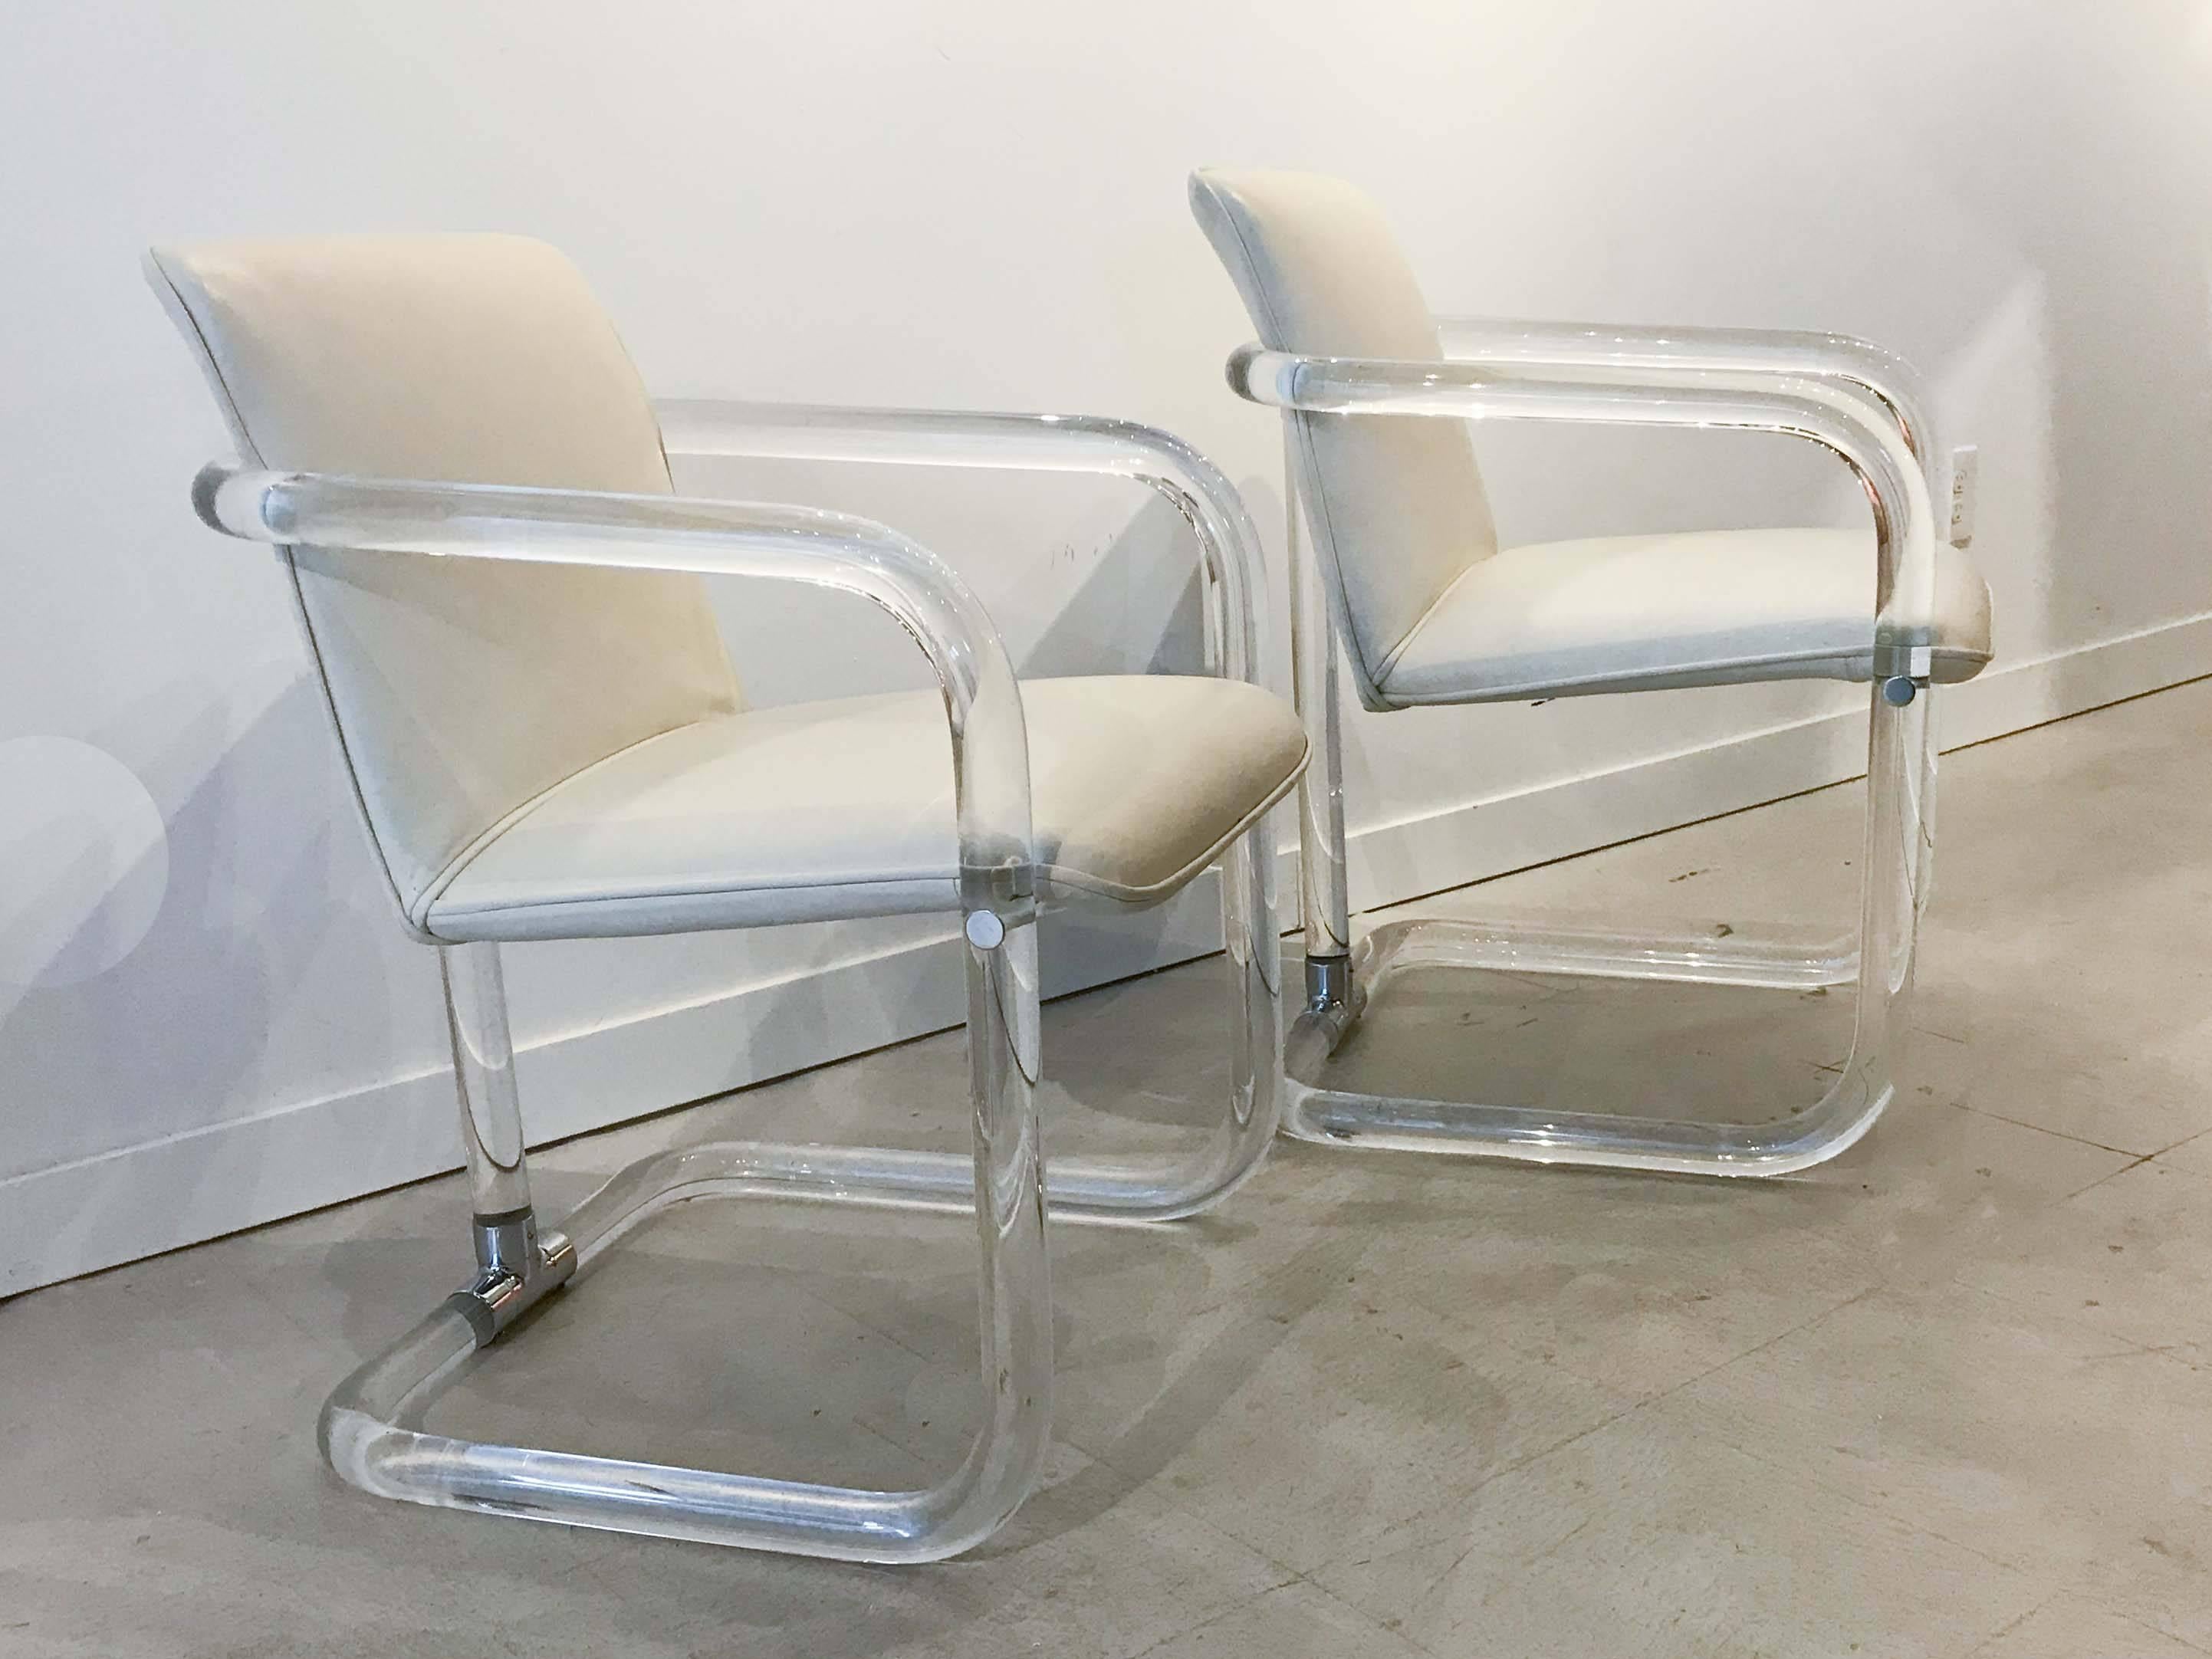 Lucite and chrome armchairs by Leon Frost. Good overall condition, buyer may wish to reupholster as the upholstery shows some wear and discolouration. Chair frames in very good original condition with minor wear consistent with age and regular use. 